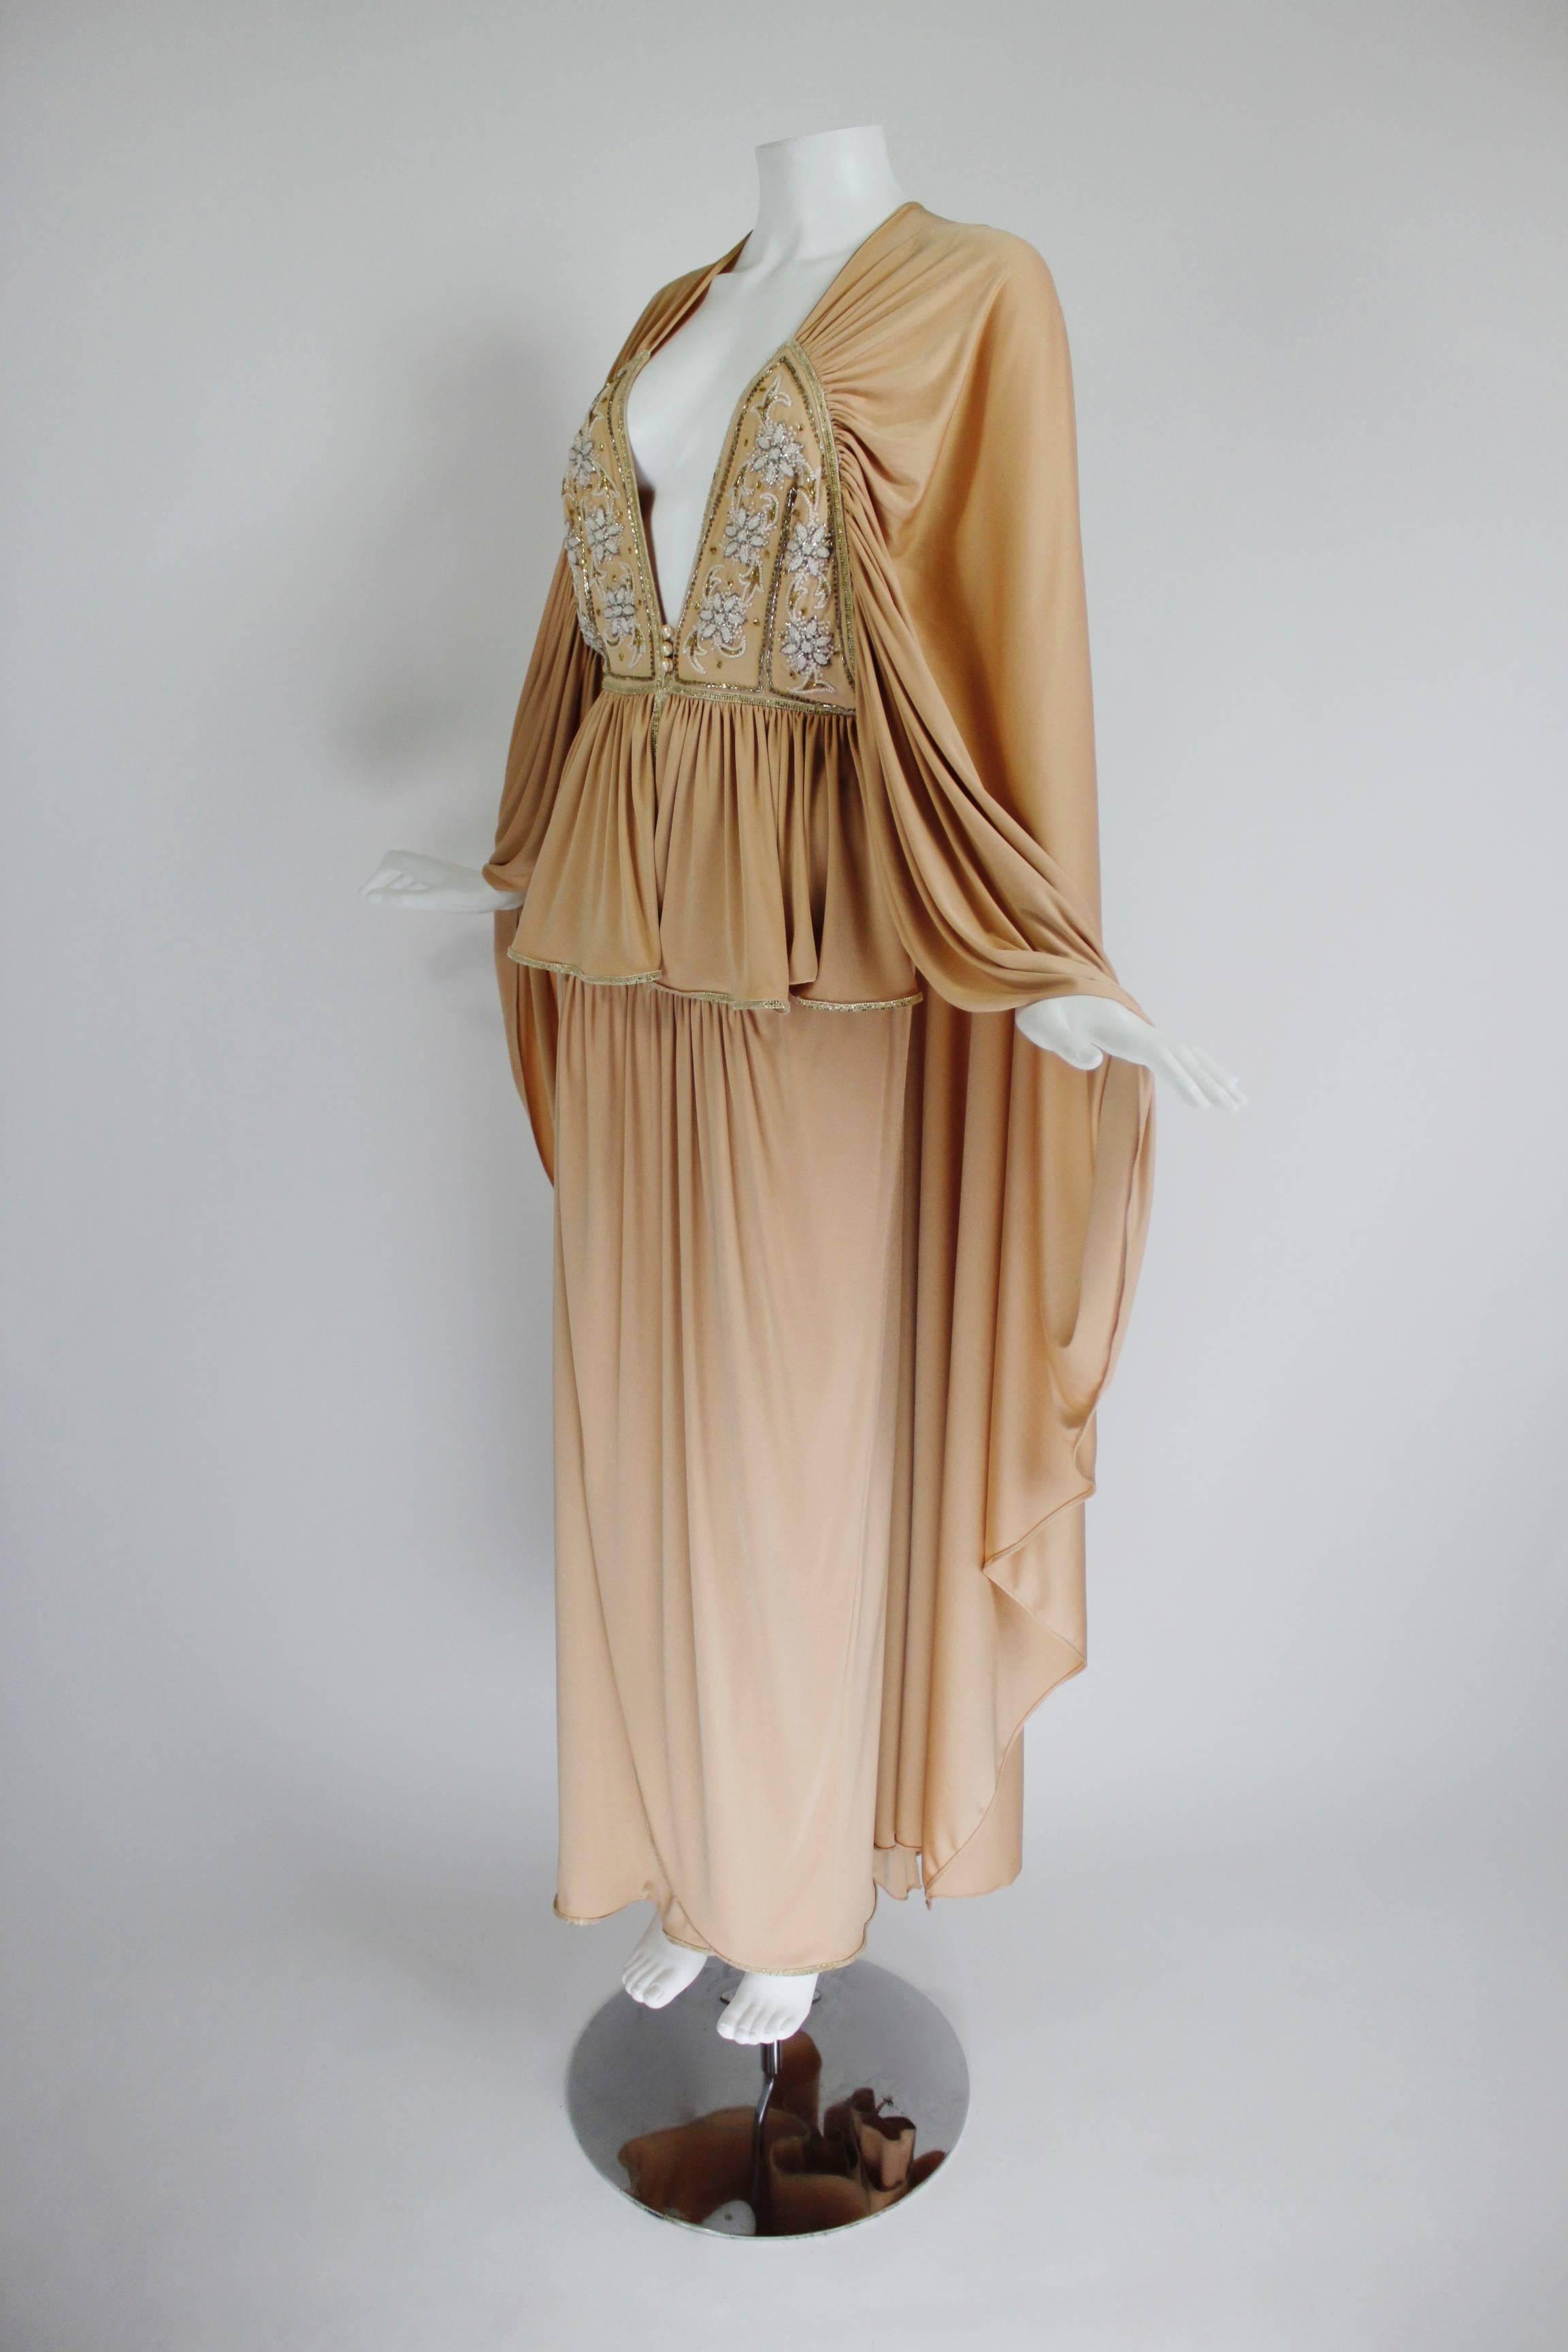 Orange 1970s Bill Gibb Ethereal Gown with Floral Beading and Plunging Neckline